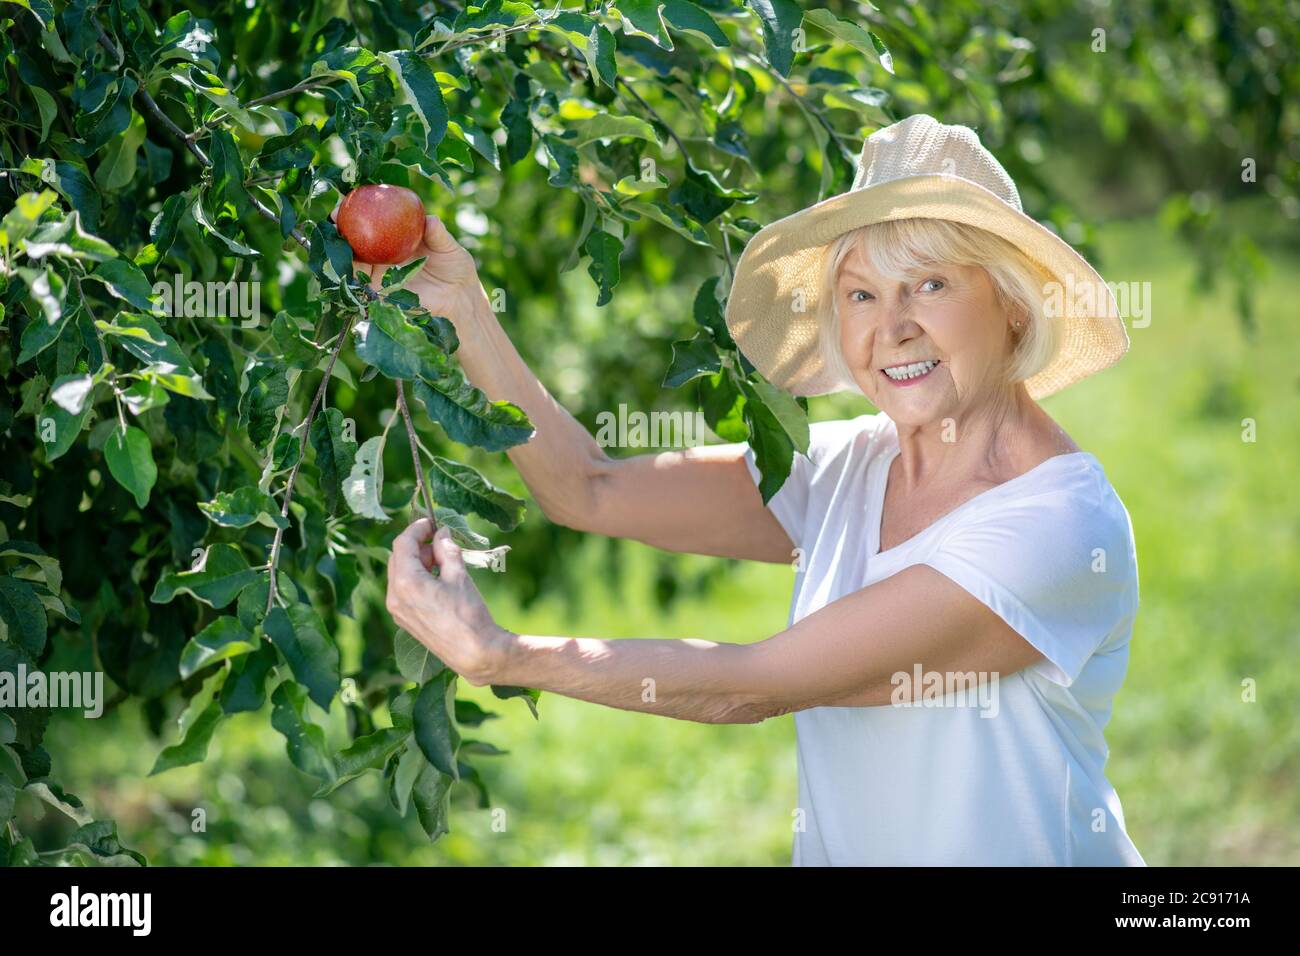 https://c8.alamy.com/comp/2C9171A/smiling-senior-woman-picking-an-apple-from-the-tree-2C9171A.jpg